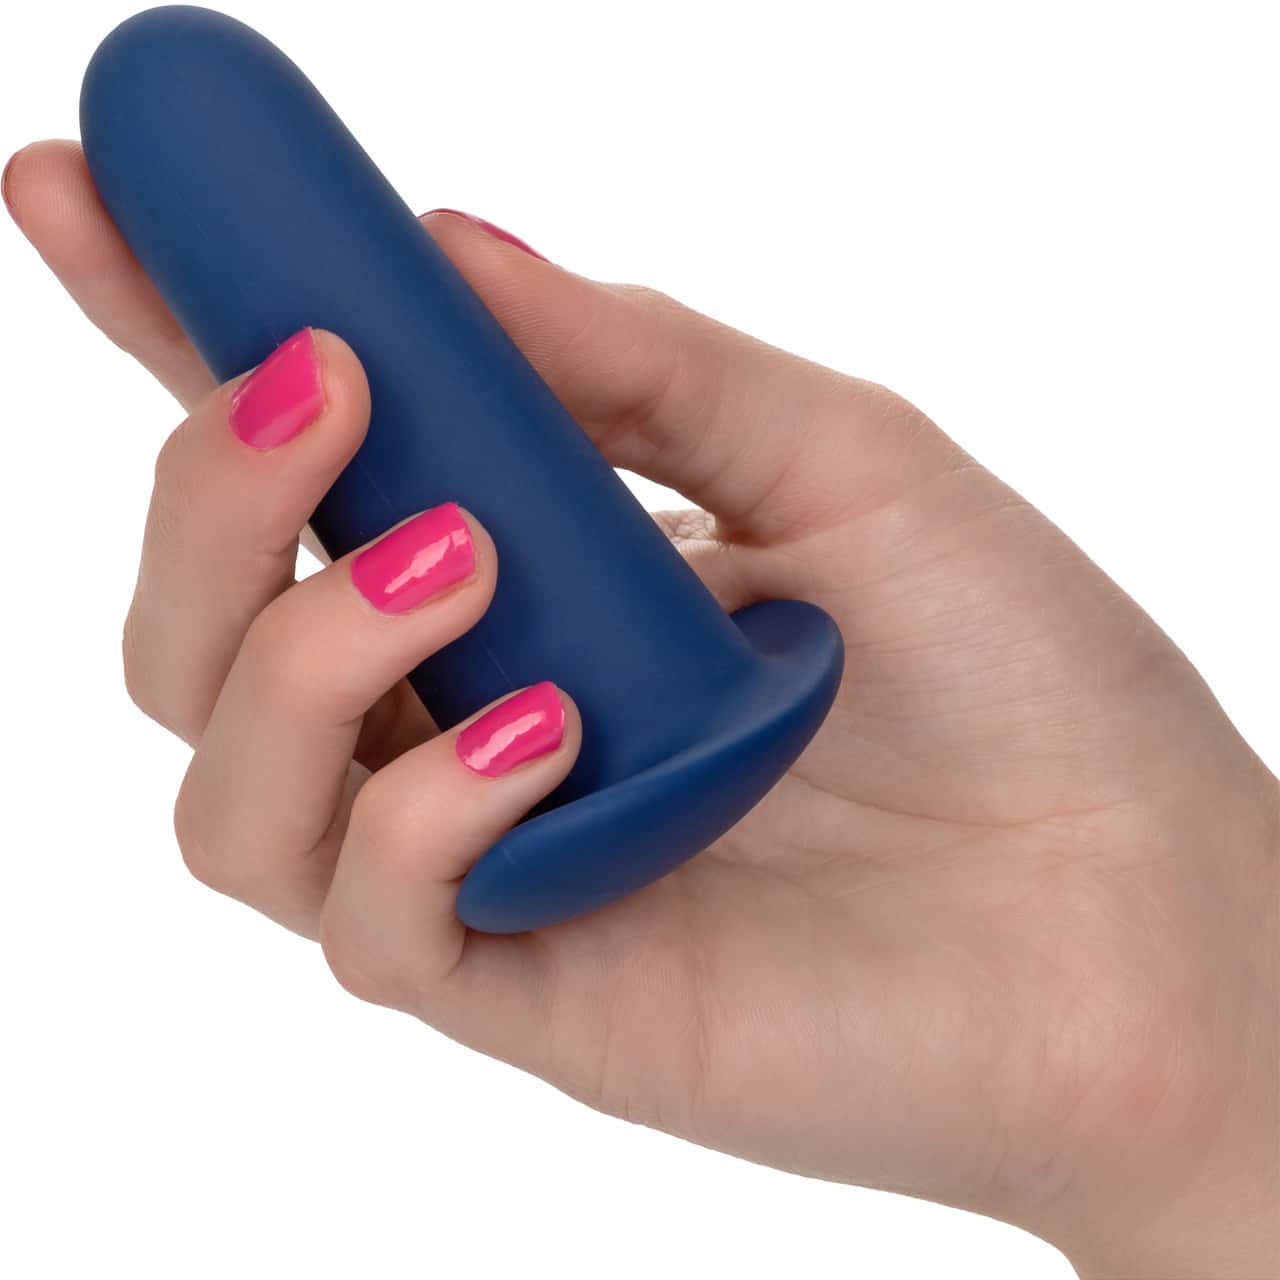 They-ology Wearable Anal Training Set. Slide 3